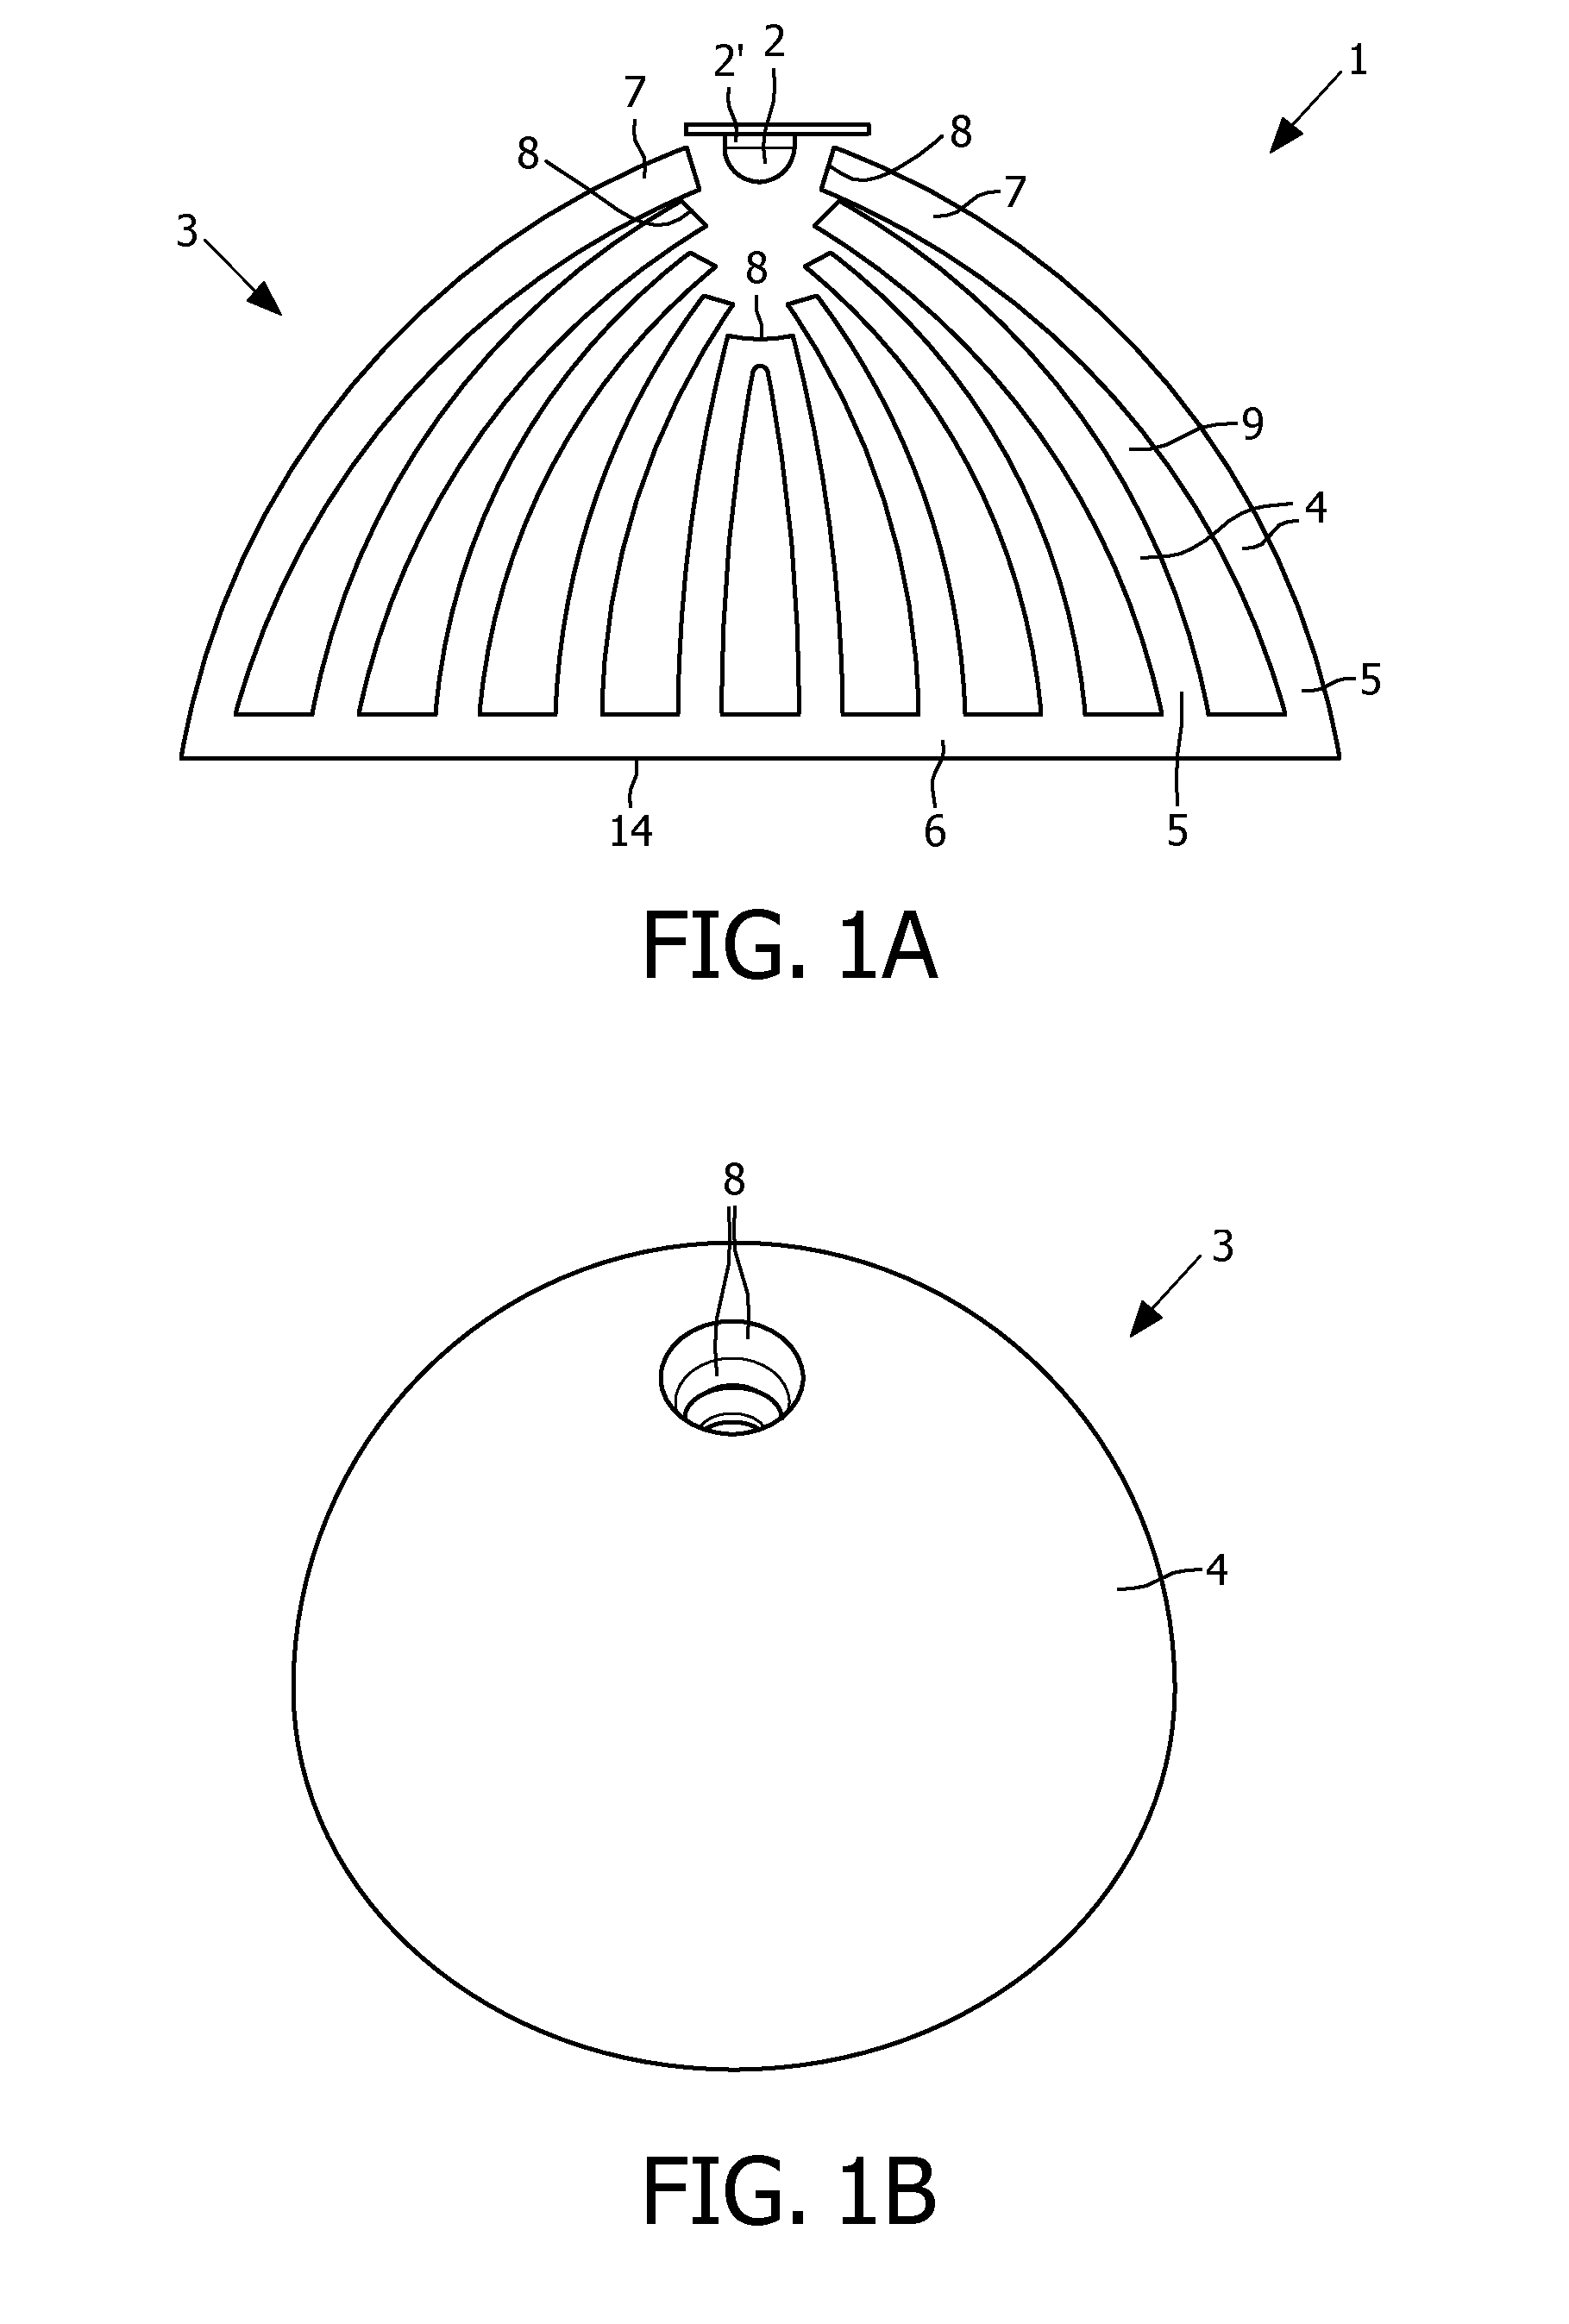 Lighting device having a lens including a plurality of interconnected elongated light-guiding elements